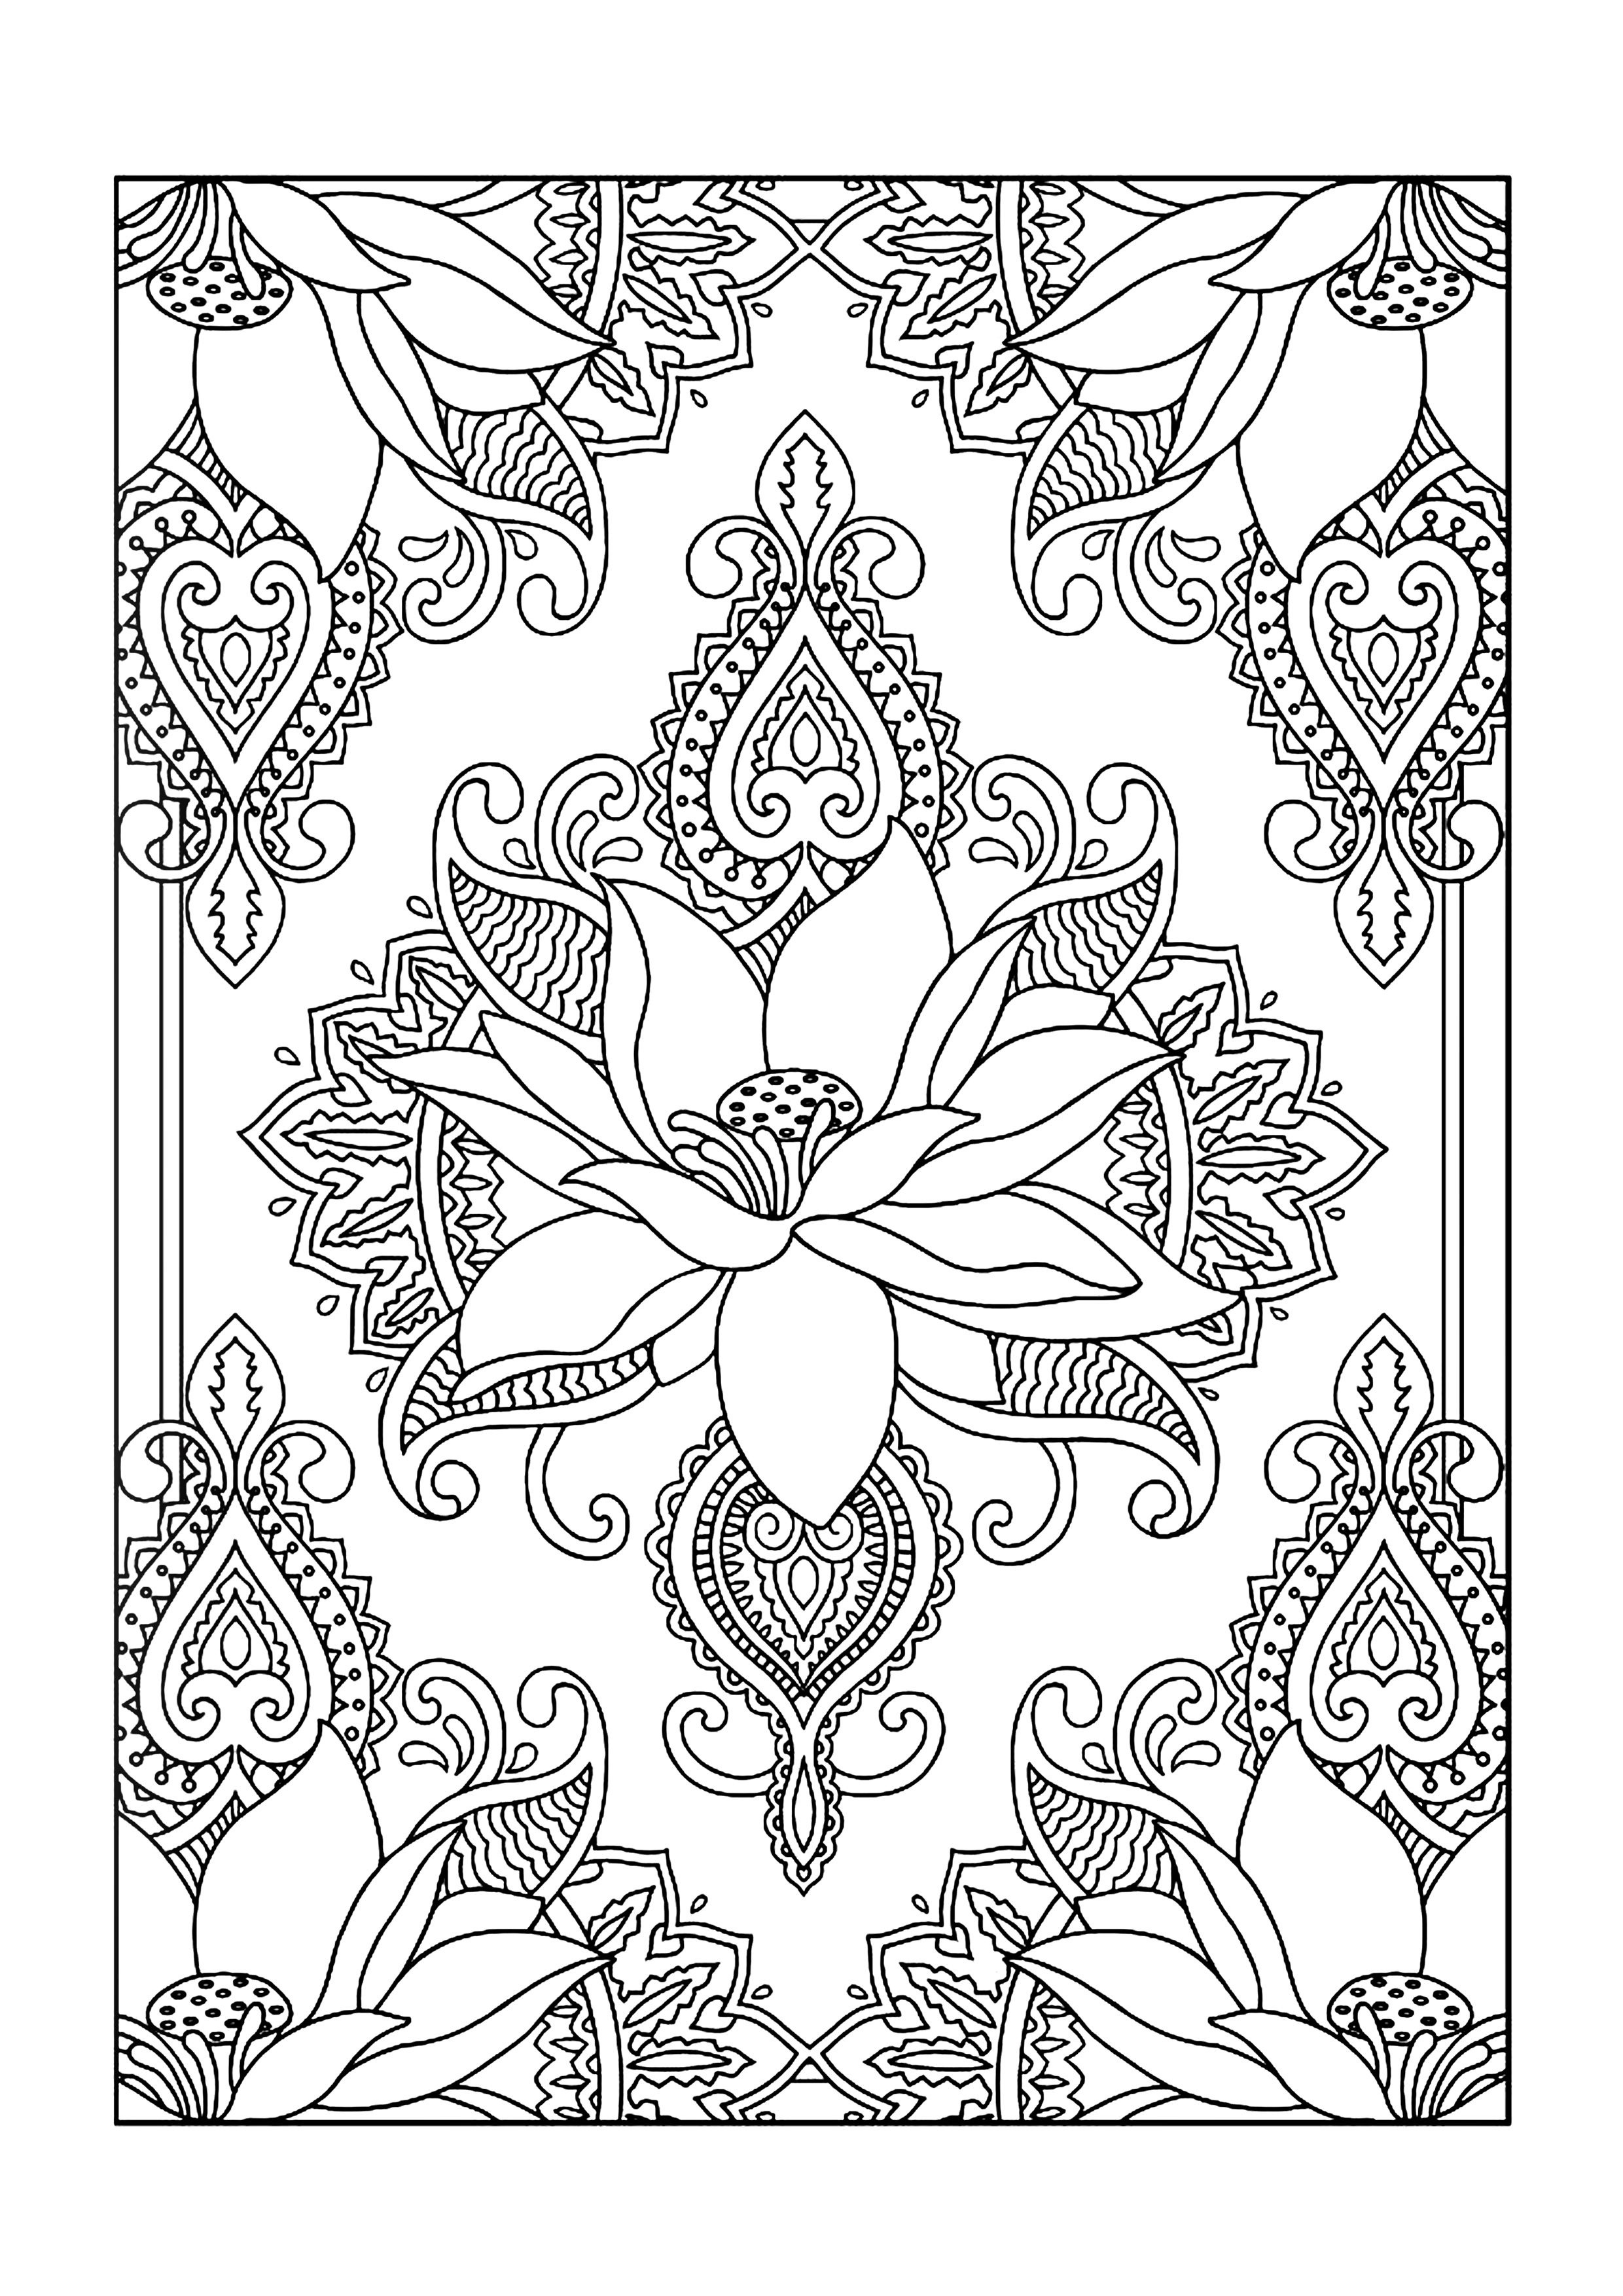 Colouring Books - Free Printable A4 Size - Lotus Flower // Imagenes - Free Printable Coloring Designs For Adults